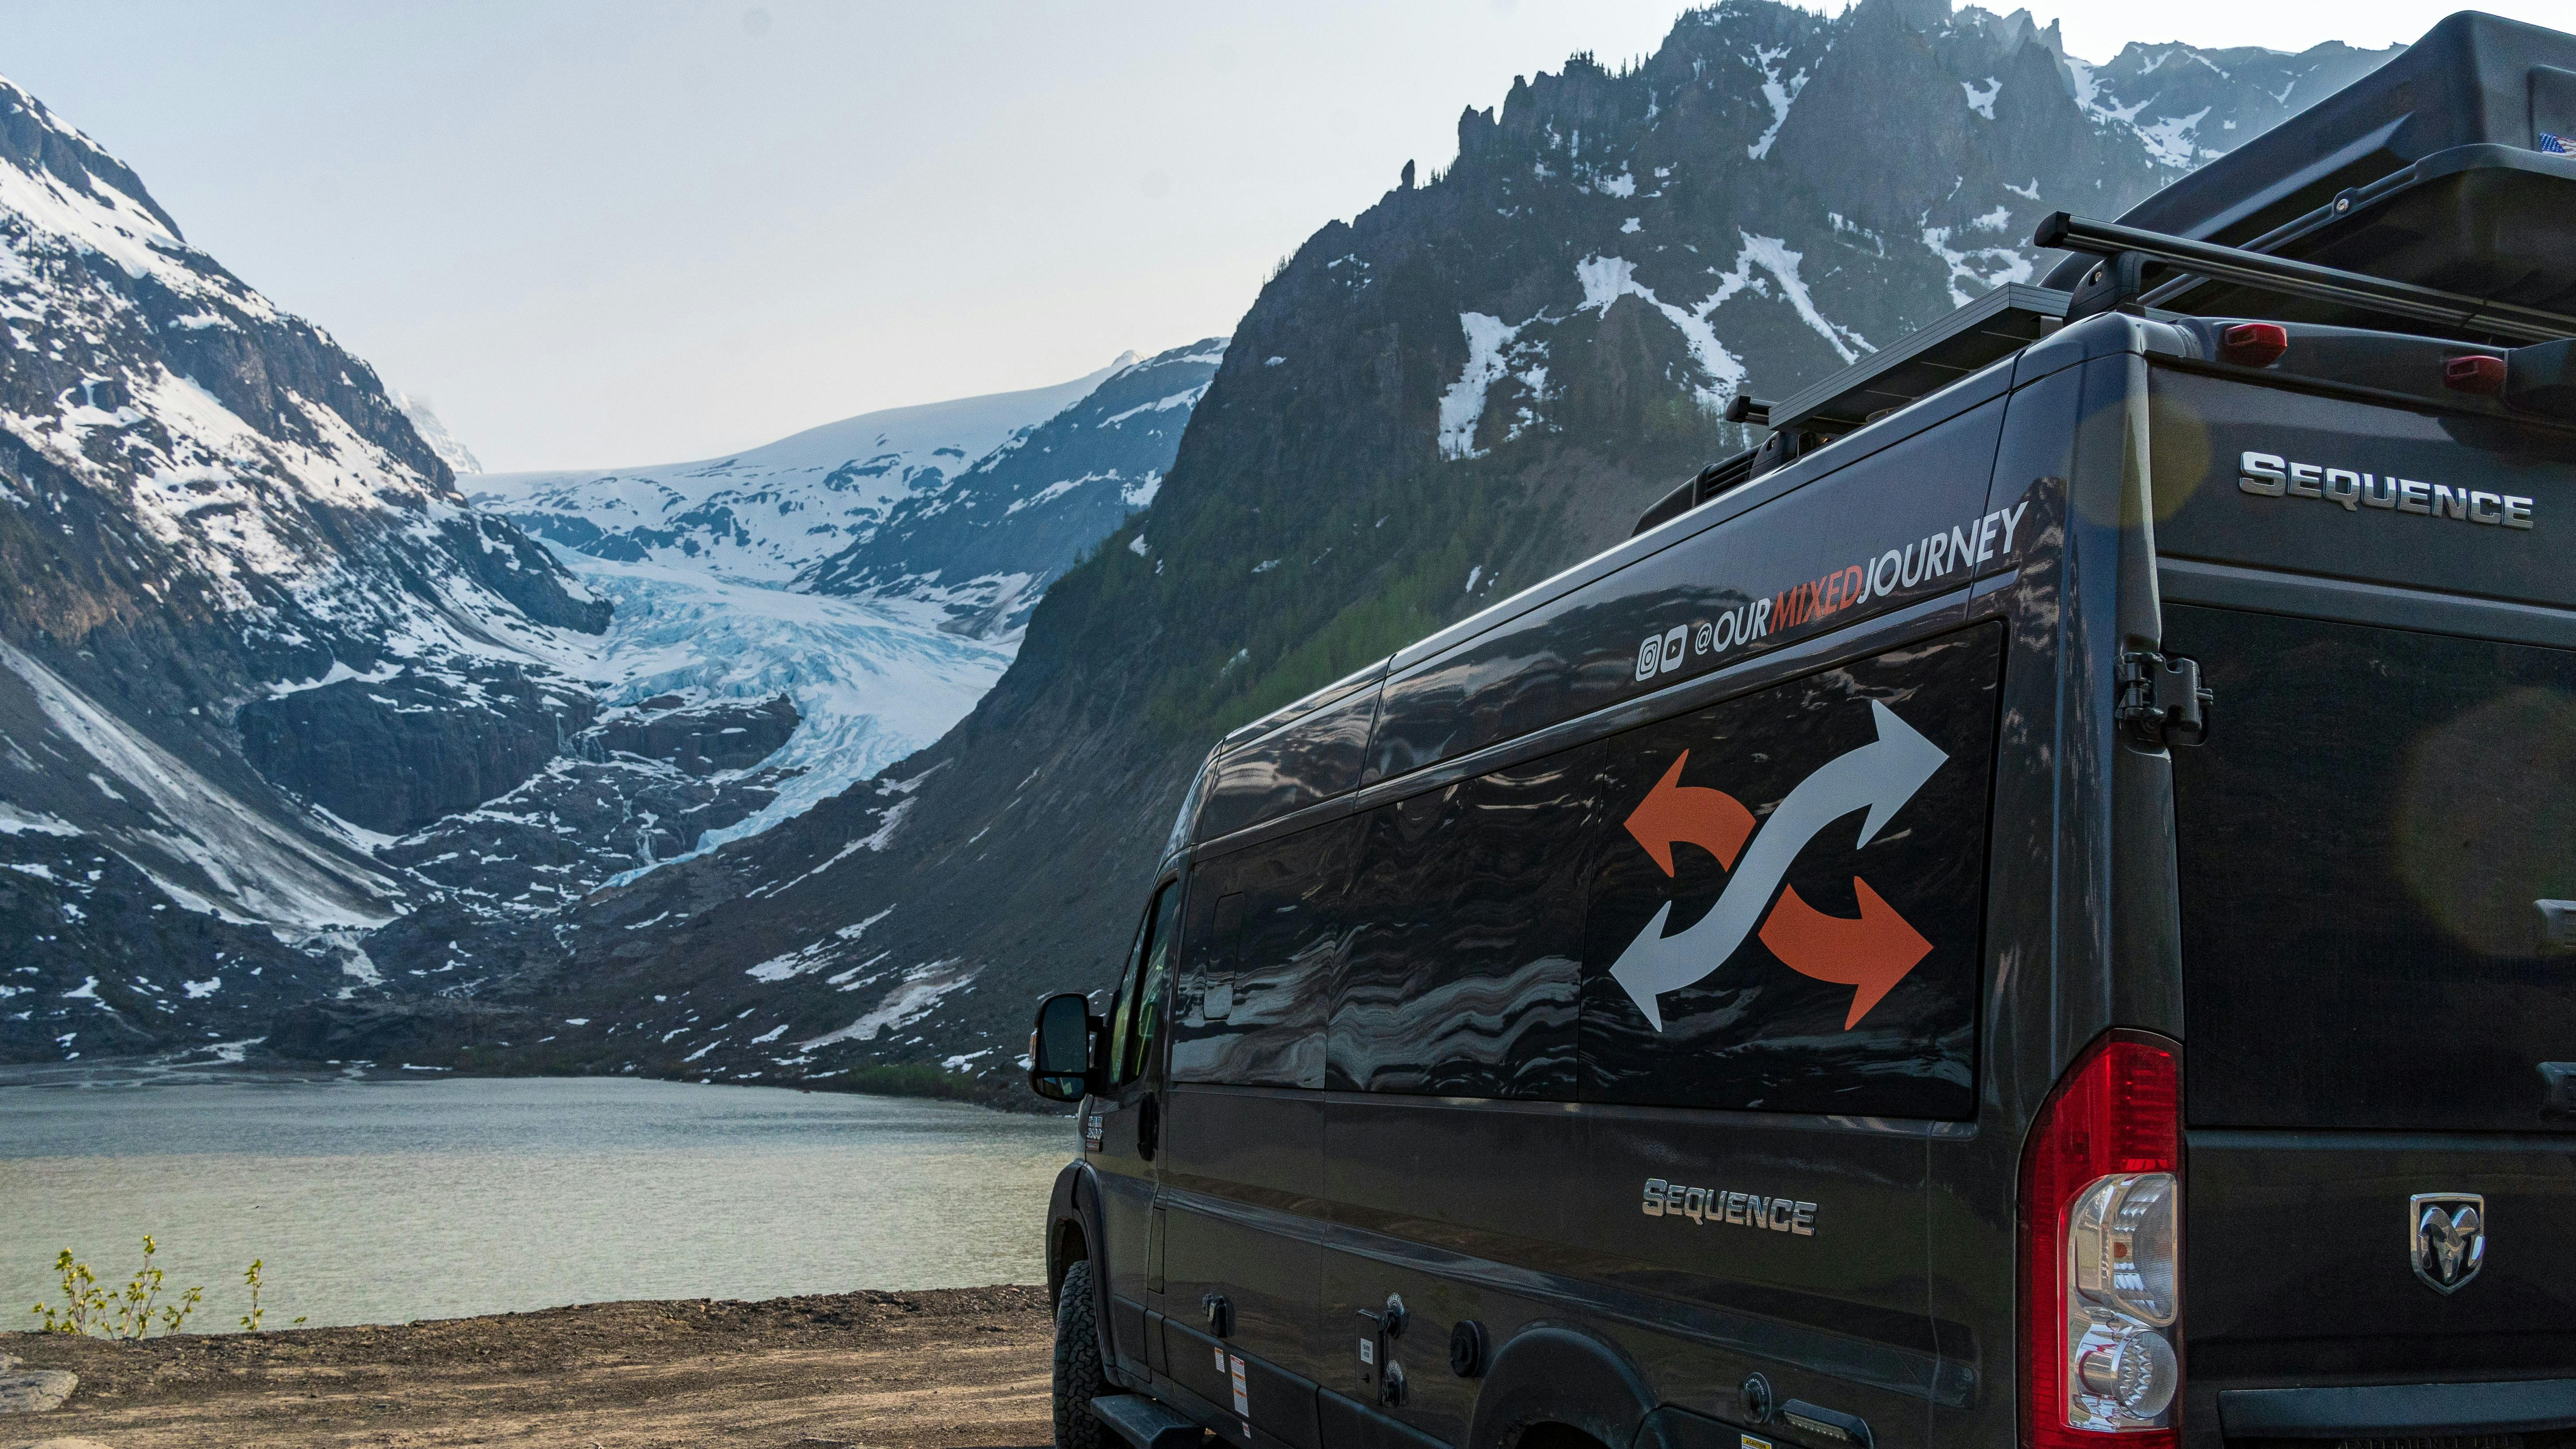 Gabe and Rocio Rivero's campervan parked in front of a lake with snowy mountains 